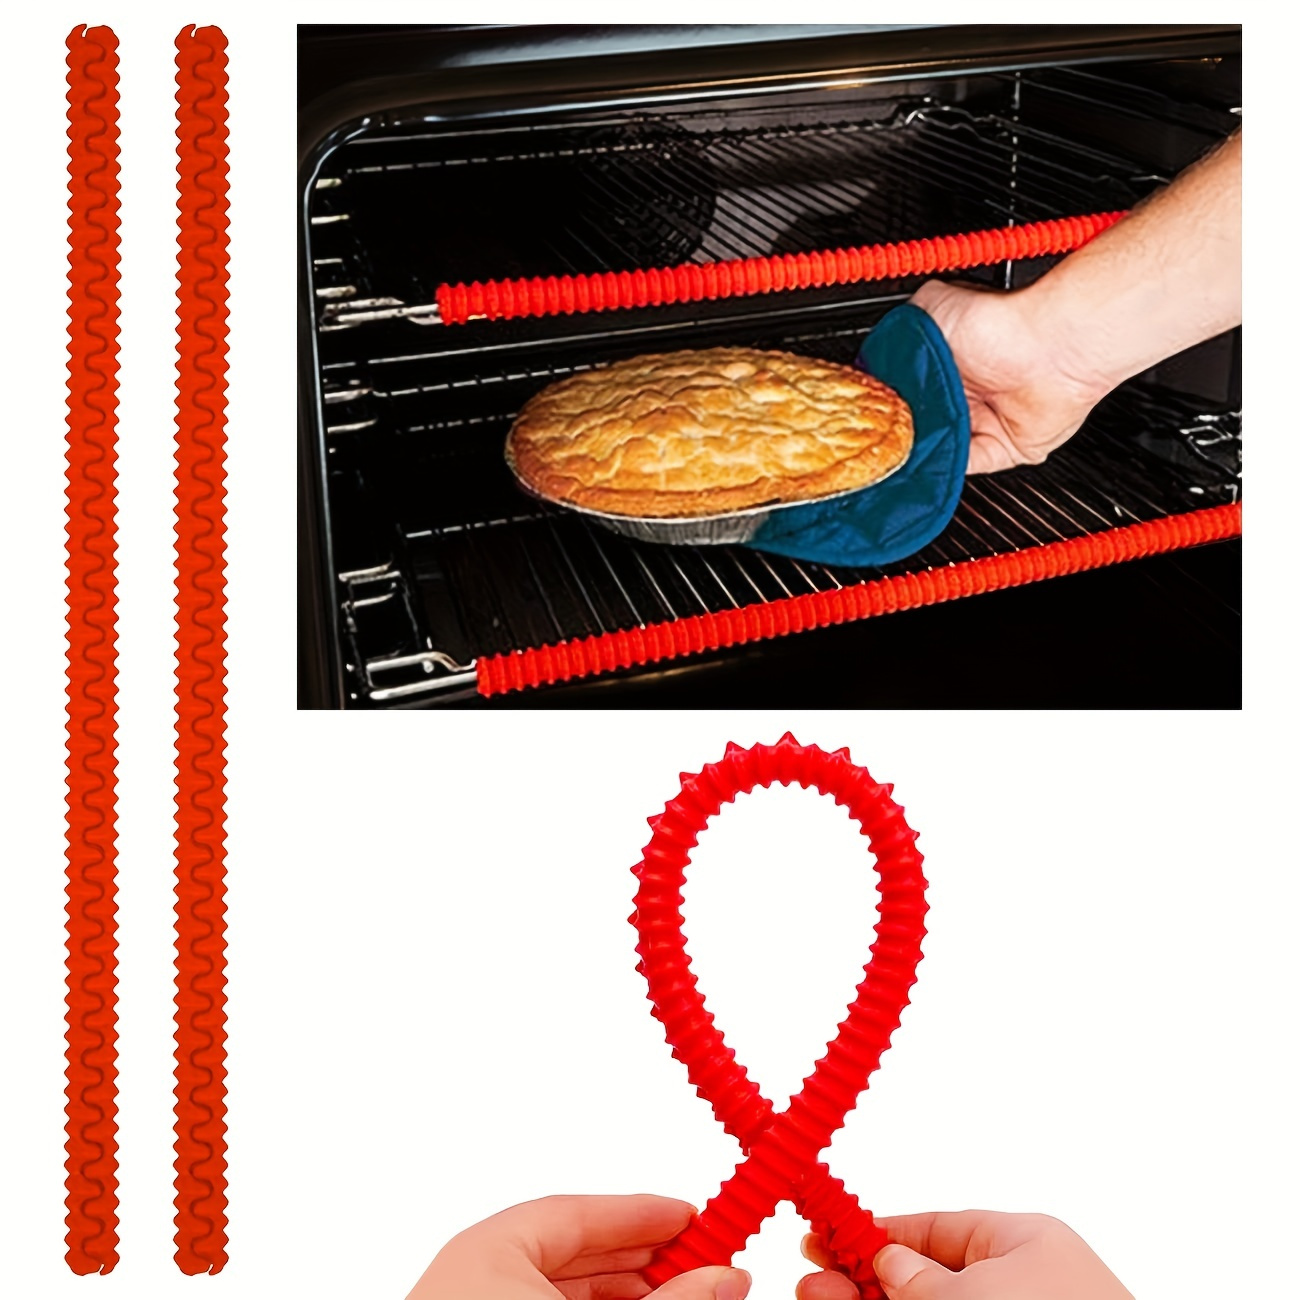 

(2pc) Heat Resistant Oven Rack - 14in Long Silicone Protectors Prevent Burns And Protect Food Grade Oven Racks